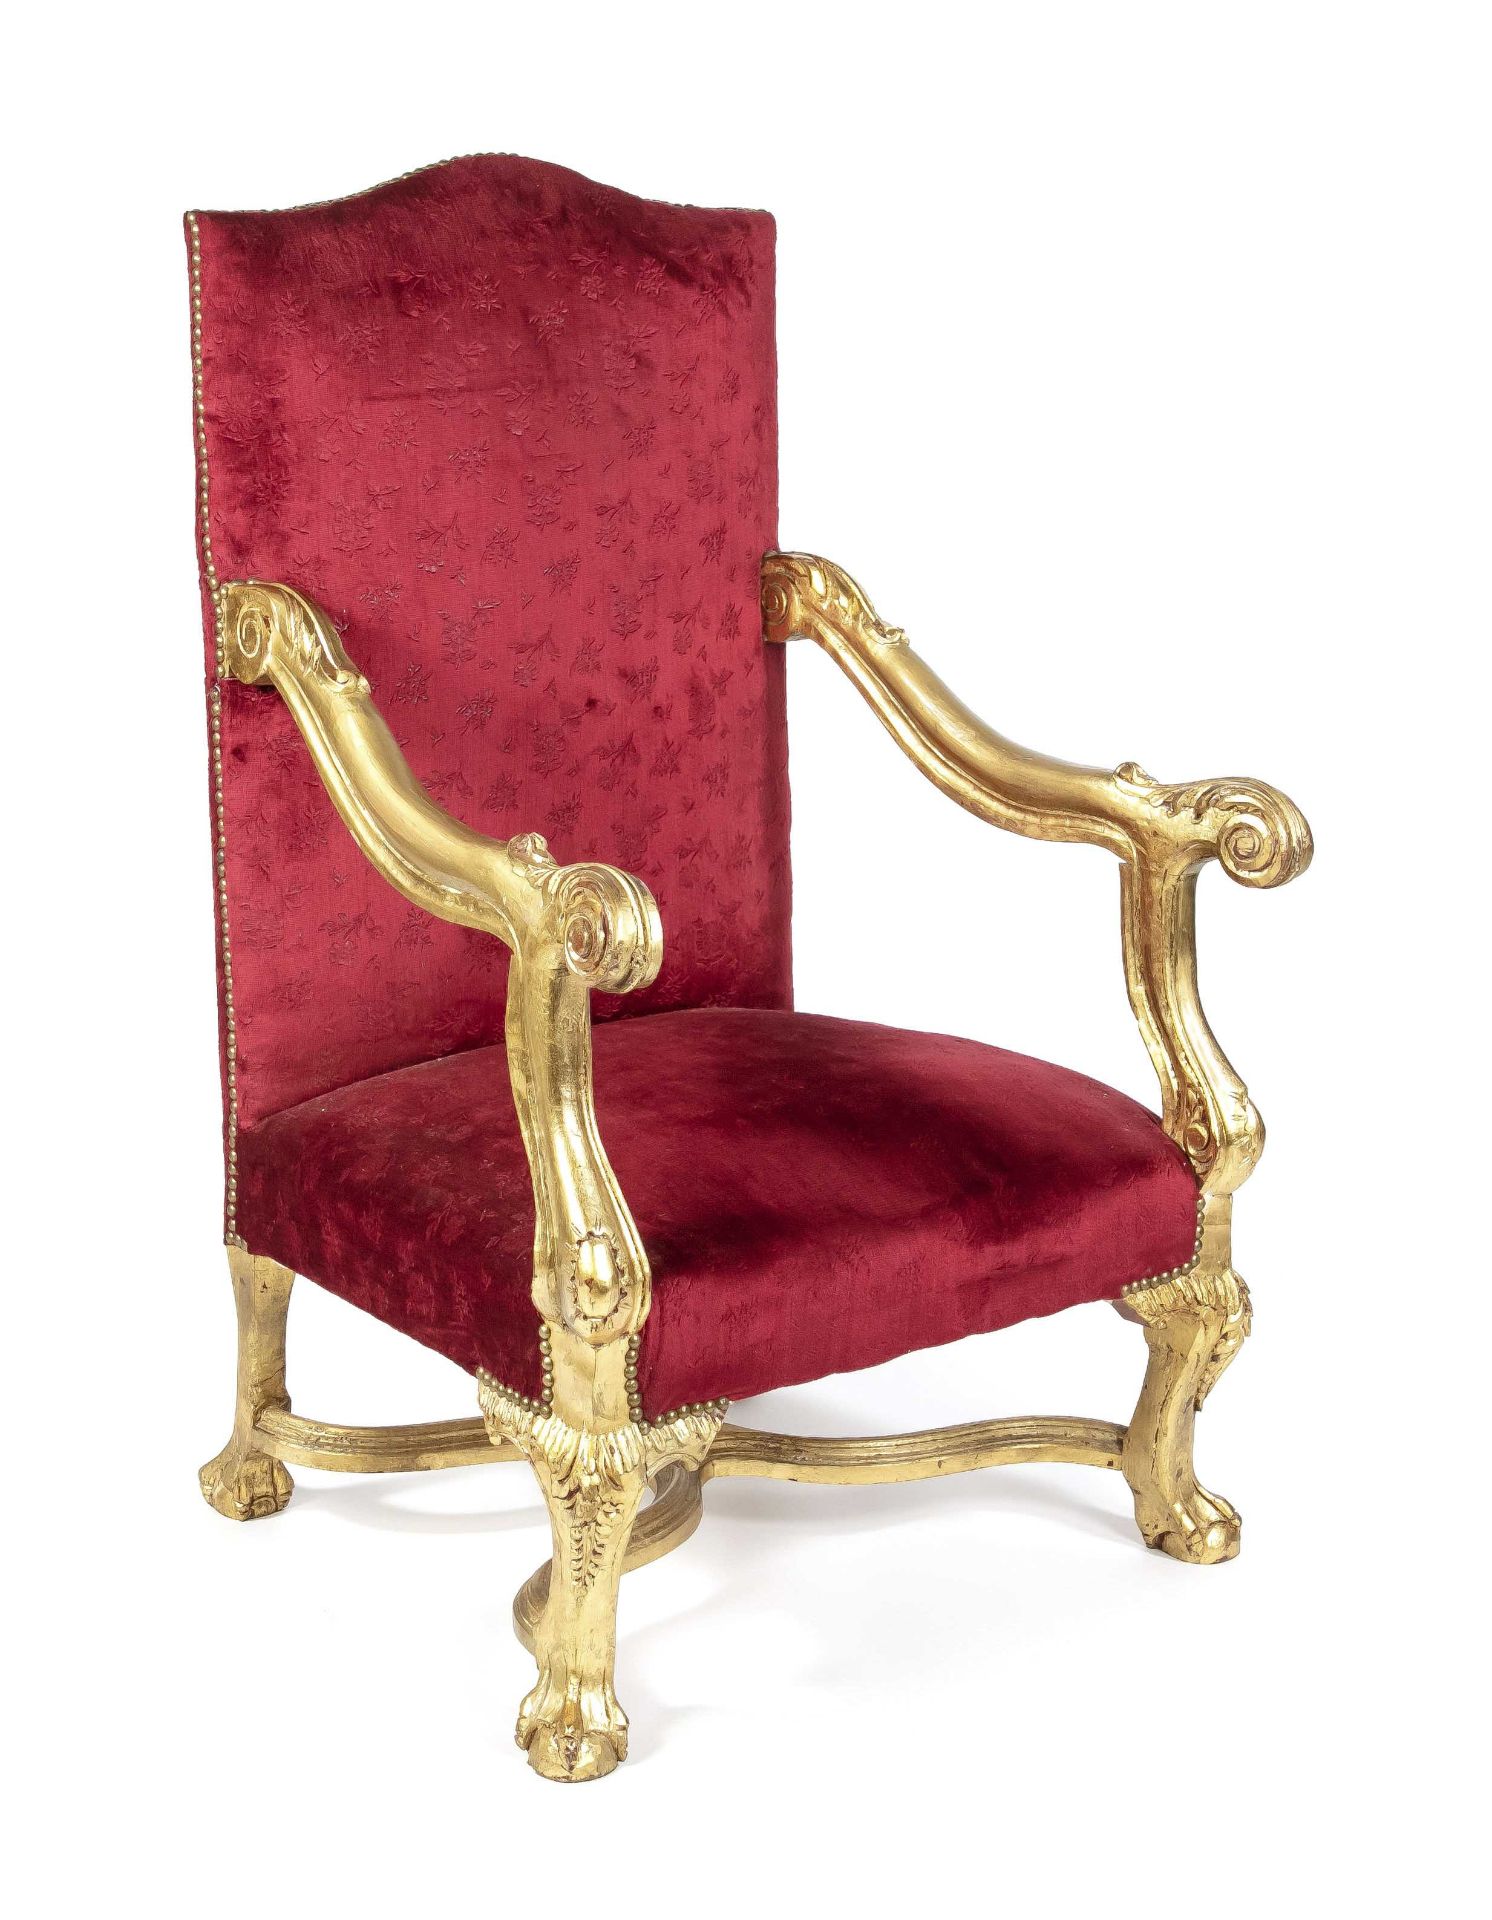 Louis Quinze style state armchair, 20th c., carved and gilded wood, red velvet upholstery, 125 x